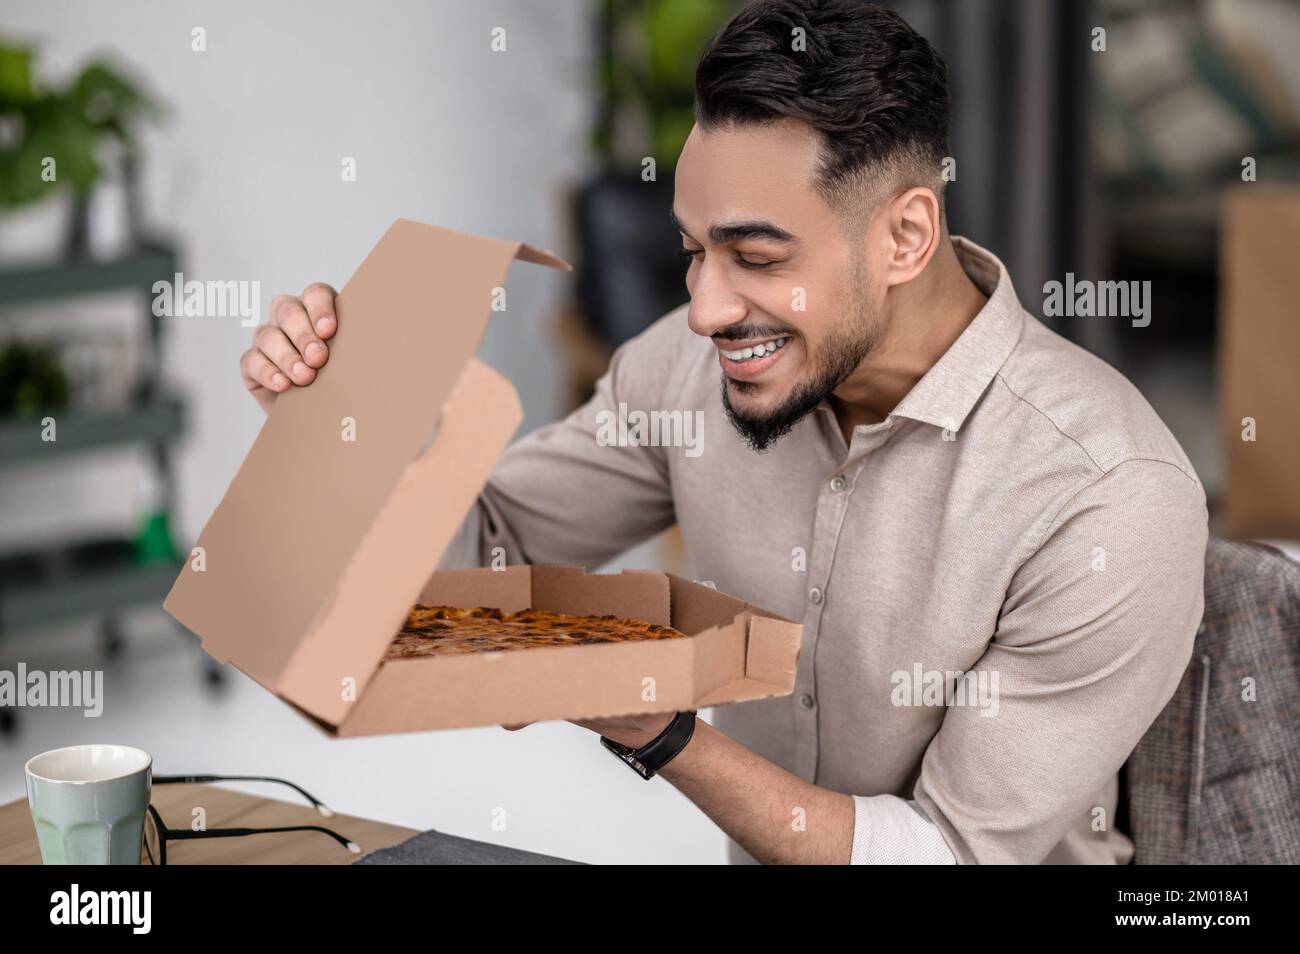 Enjoyment. Happy young bearded man with closed eyes holding open pizza box while sitting at table indoors. Stock Photo